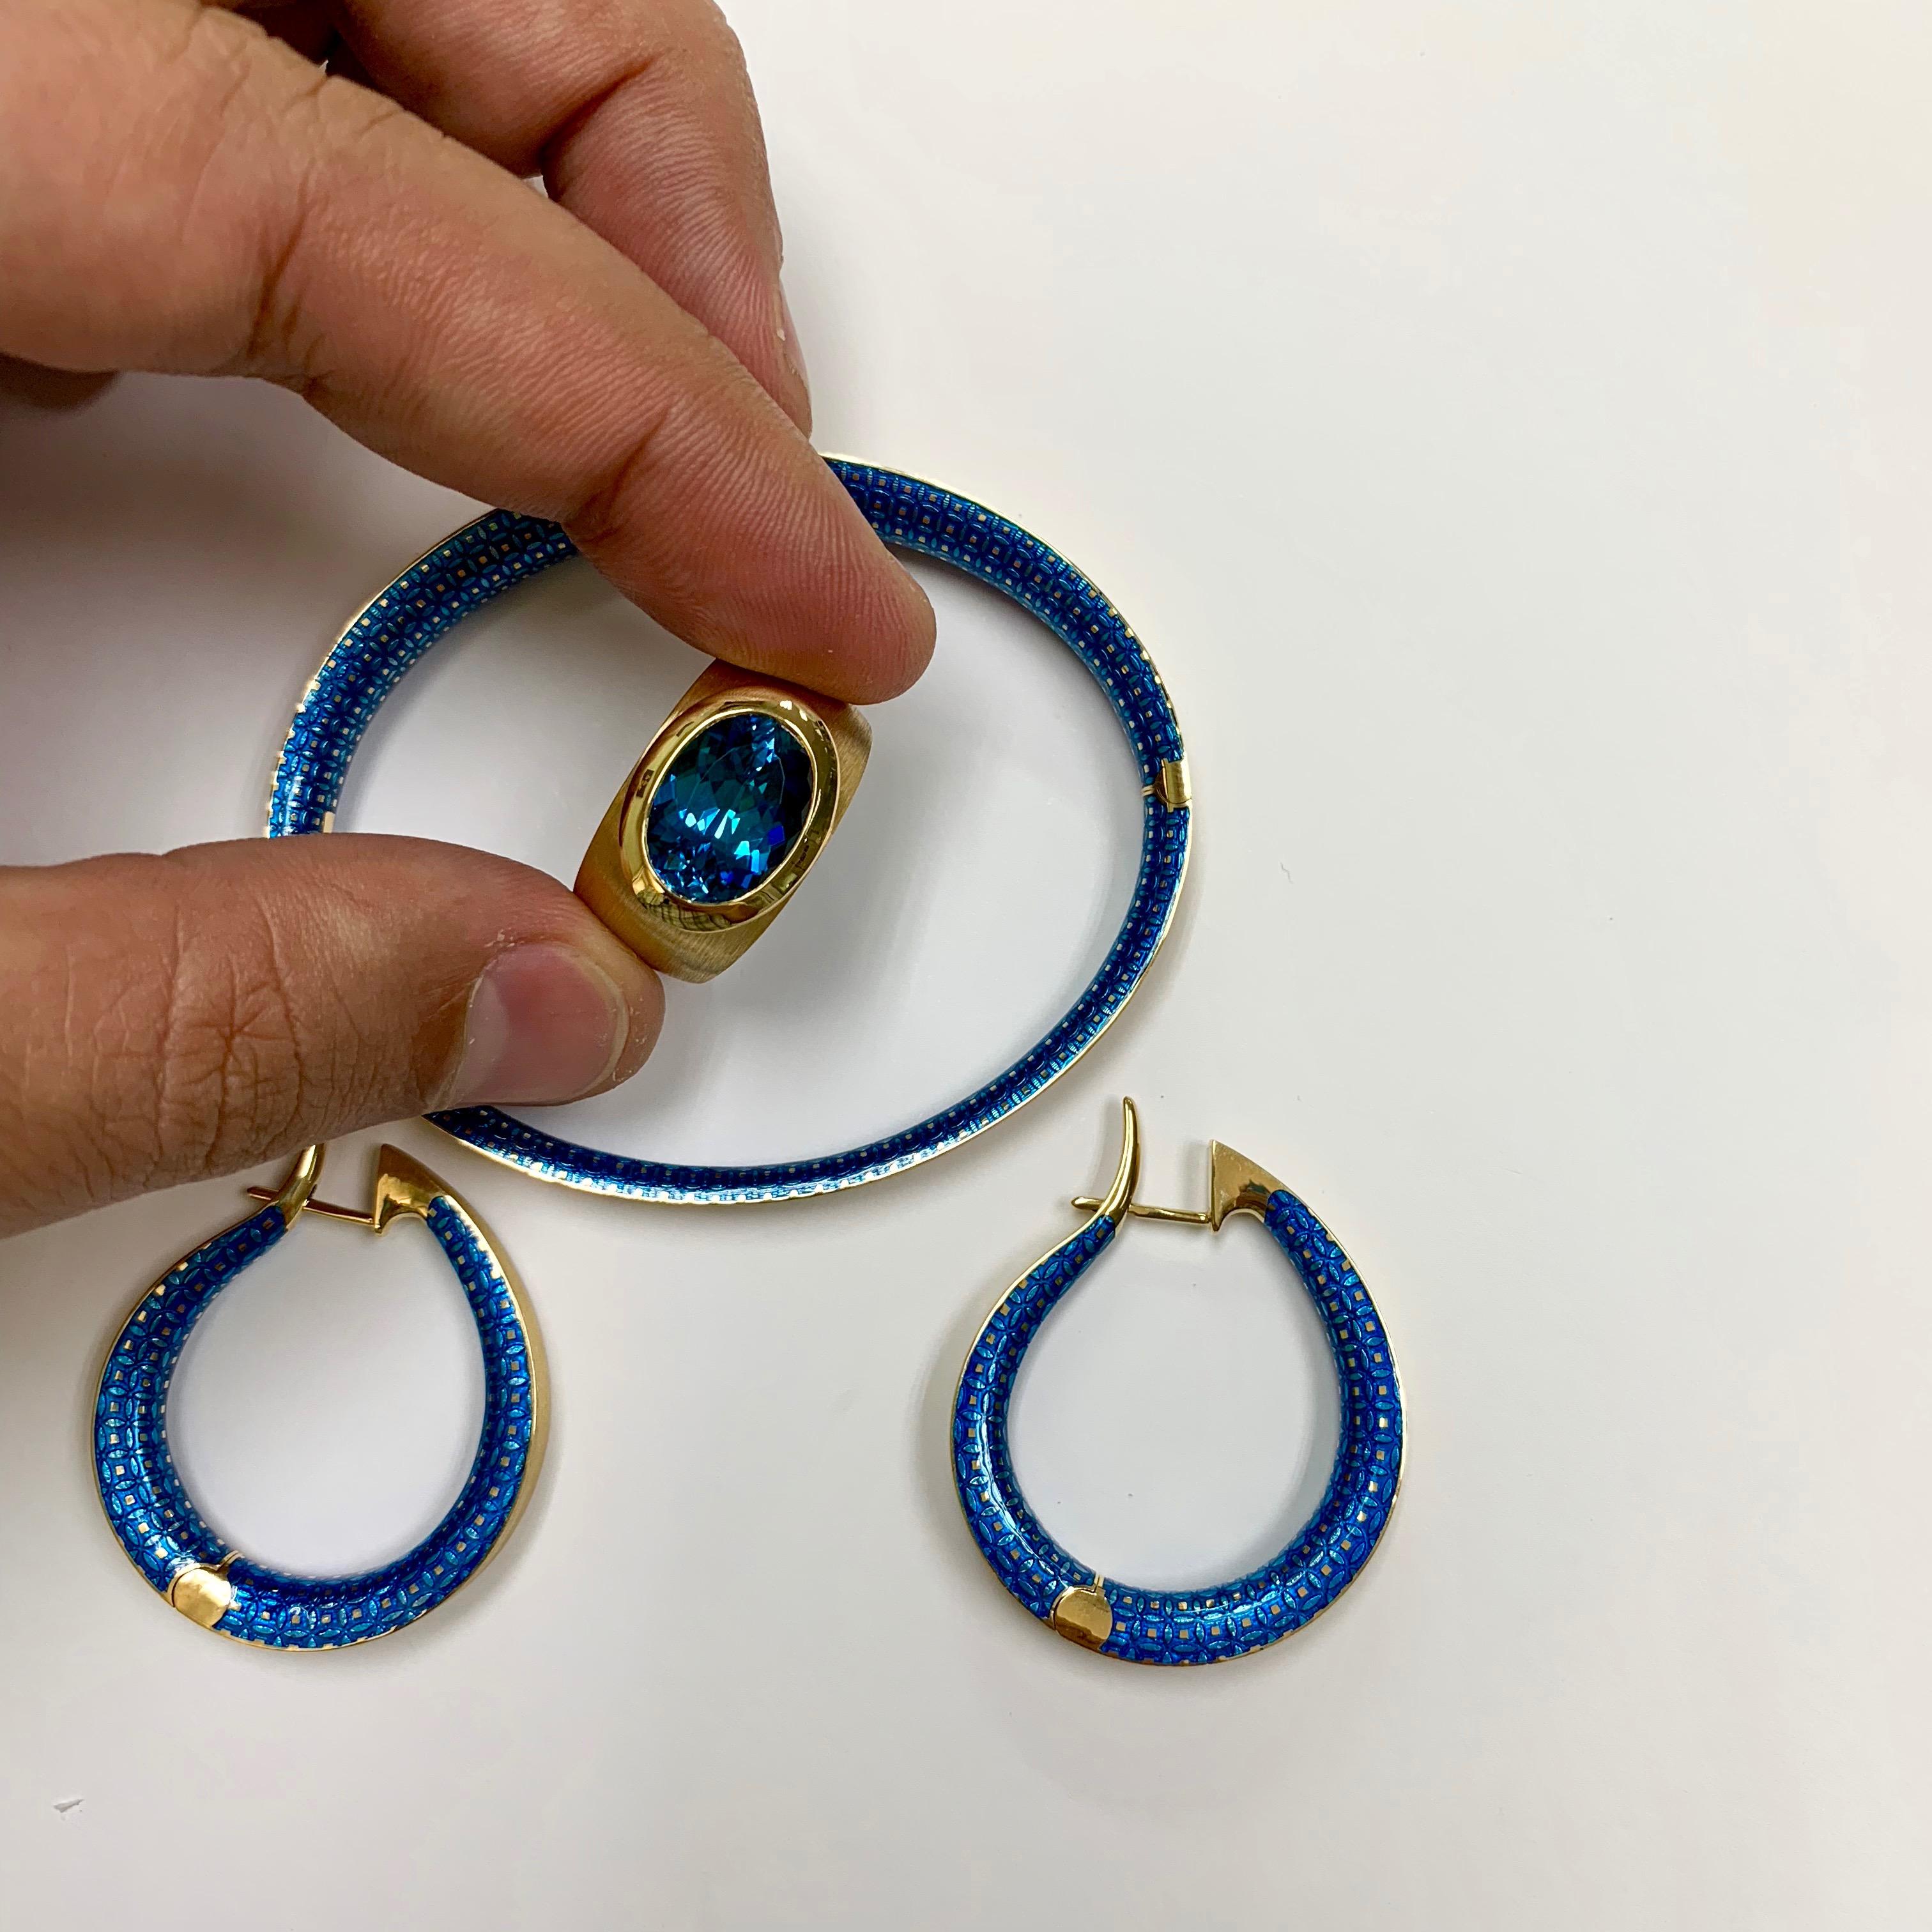 Blue Topaz Colored Enamel 18 Karat Yellow Gold Ring Earrings Bangle Suite

Please take a look at one of our trade mark texture in Kaleidoscope Collection - 